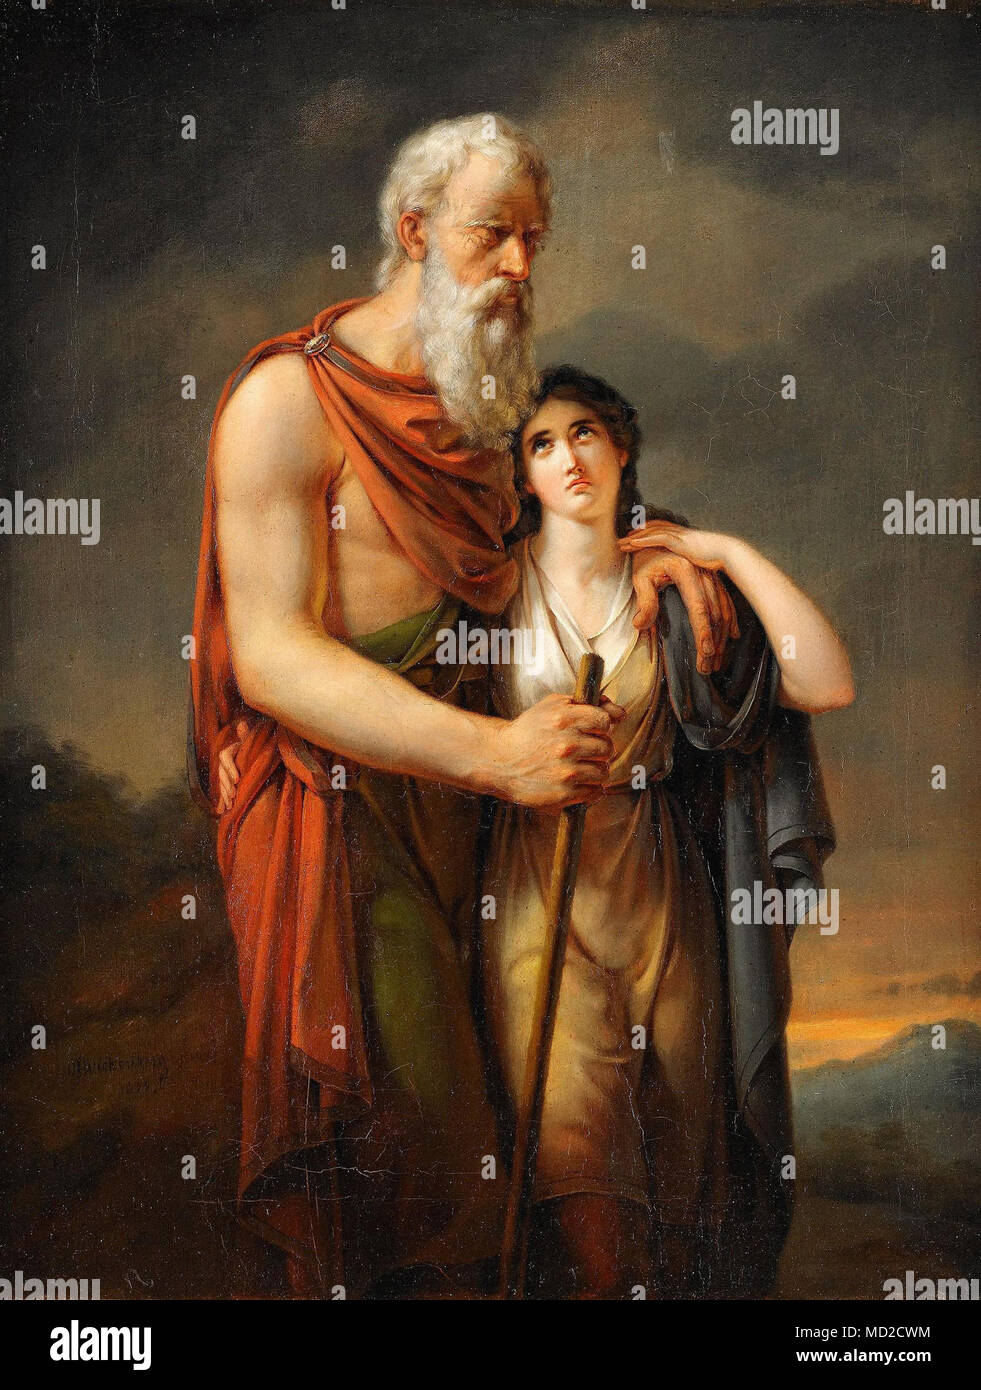 Stanislaw Witkiewicz - Oedipe et Antigone Banque D'Images